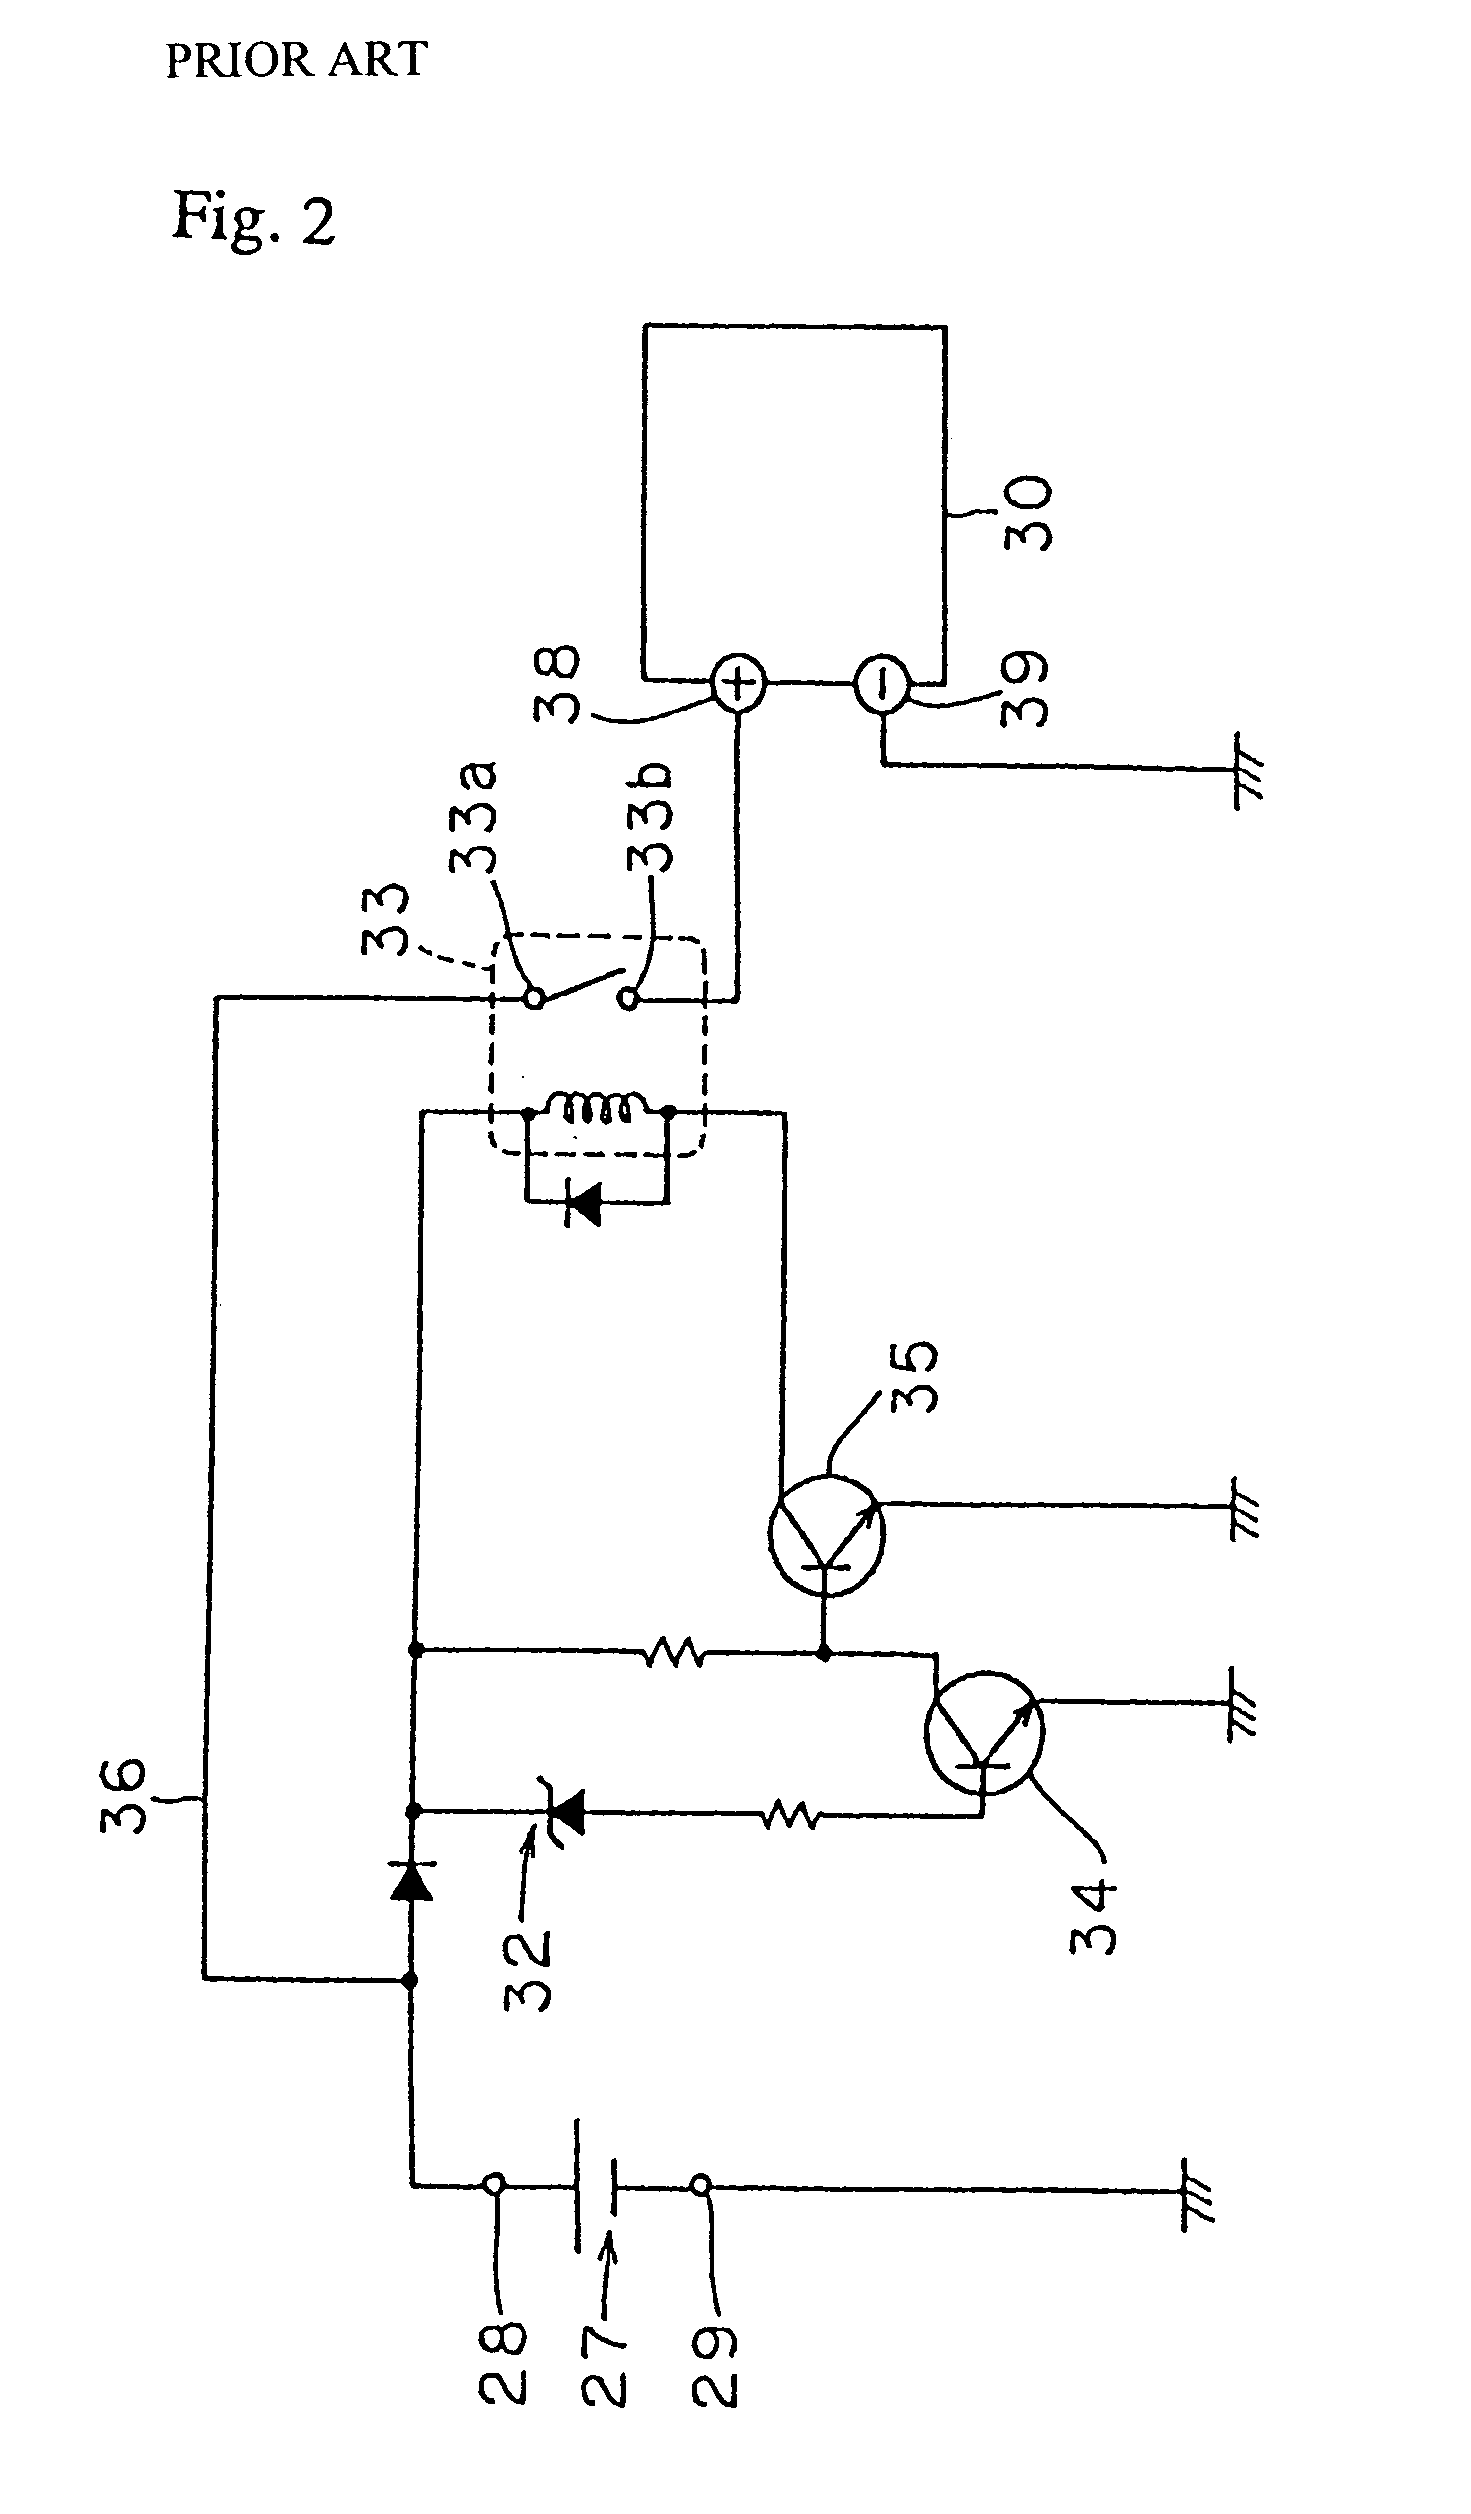 Power supply protection circuit